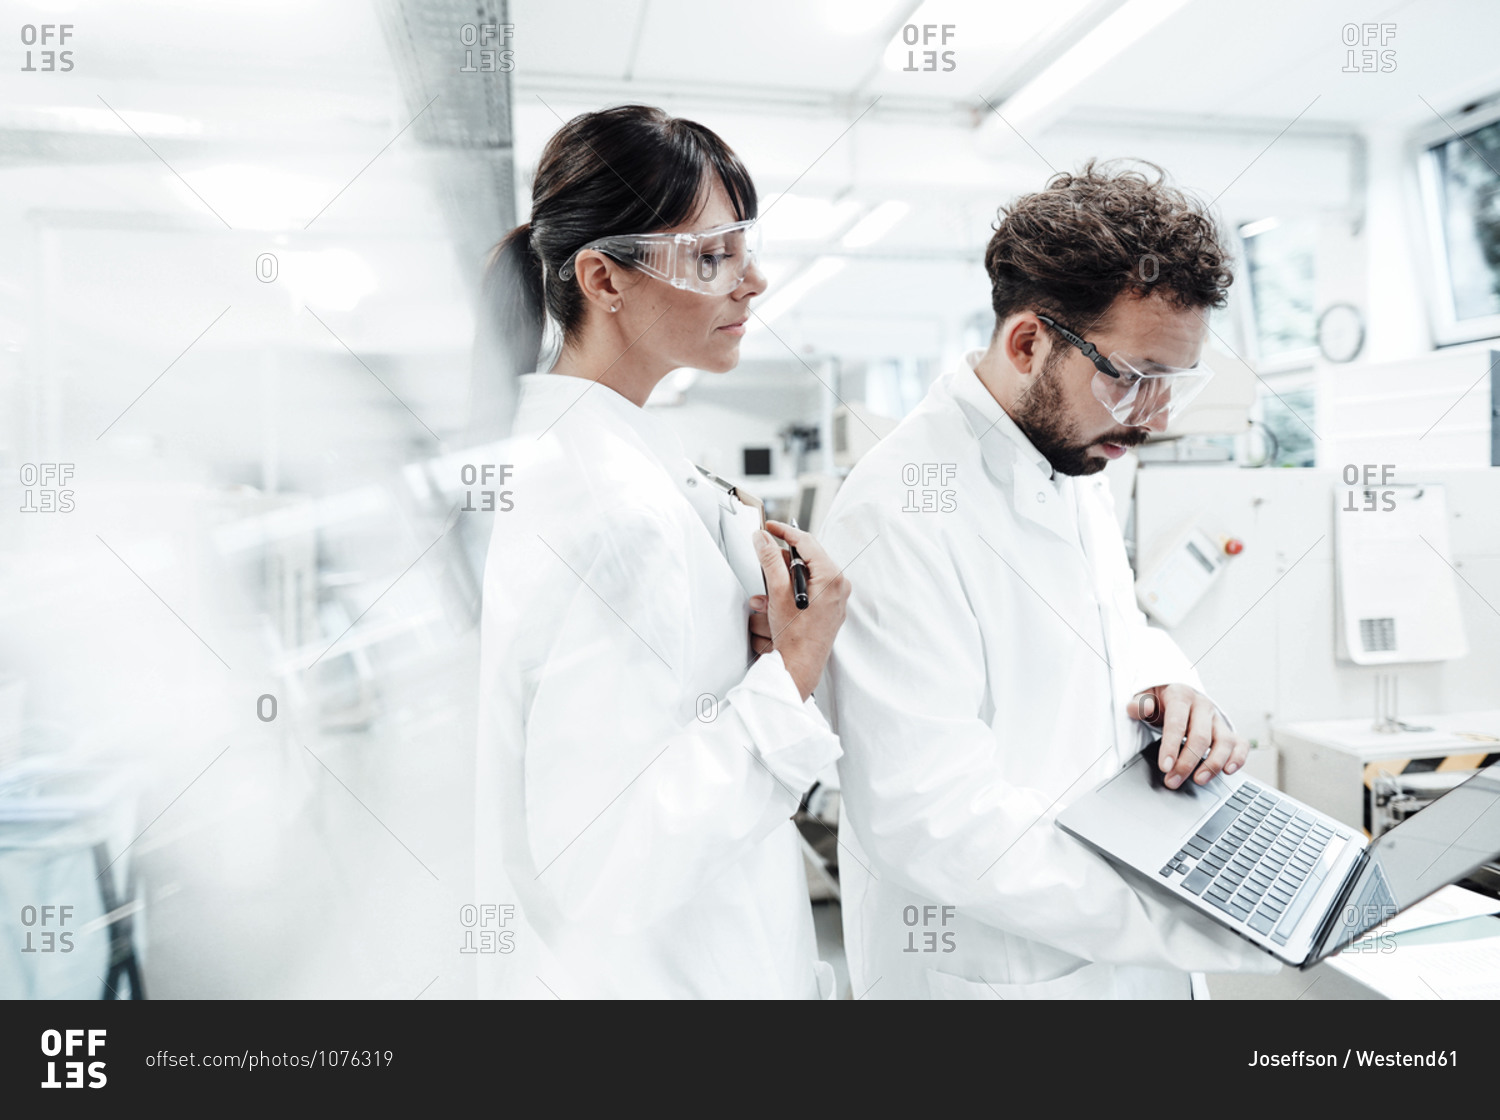 Female scientist standing by male colleague using laptop at laboratory